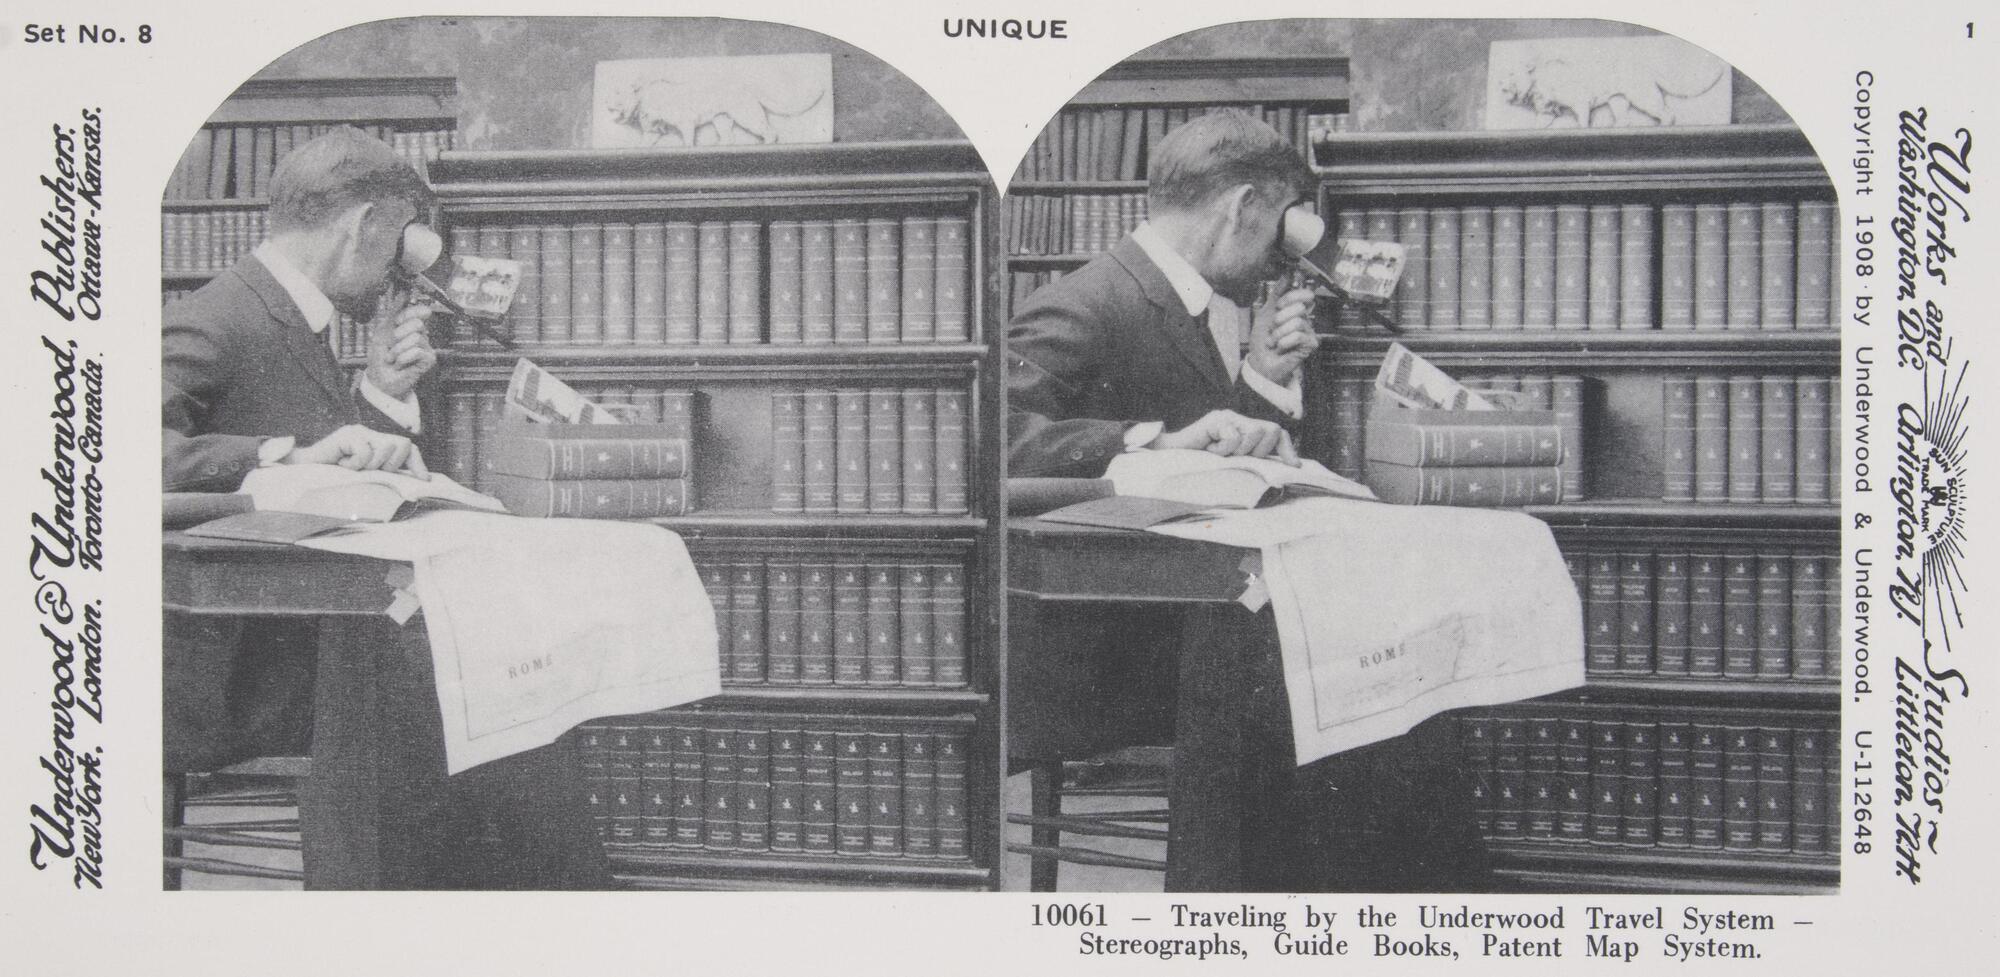 This black and white stereoscopic image features two images of a man looking at a stereoscope image in a library with his finger in a book and a map of Rome on a table.  It is surrounded by the text: Set No. 8; Underwood &amp; Underwood, Publishers, Unique; 10061—Traveling by the Underwood Travel System—Stereographs, Guide Books, Patent Map System.